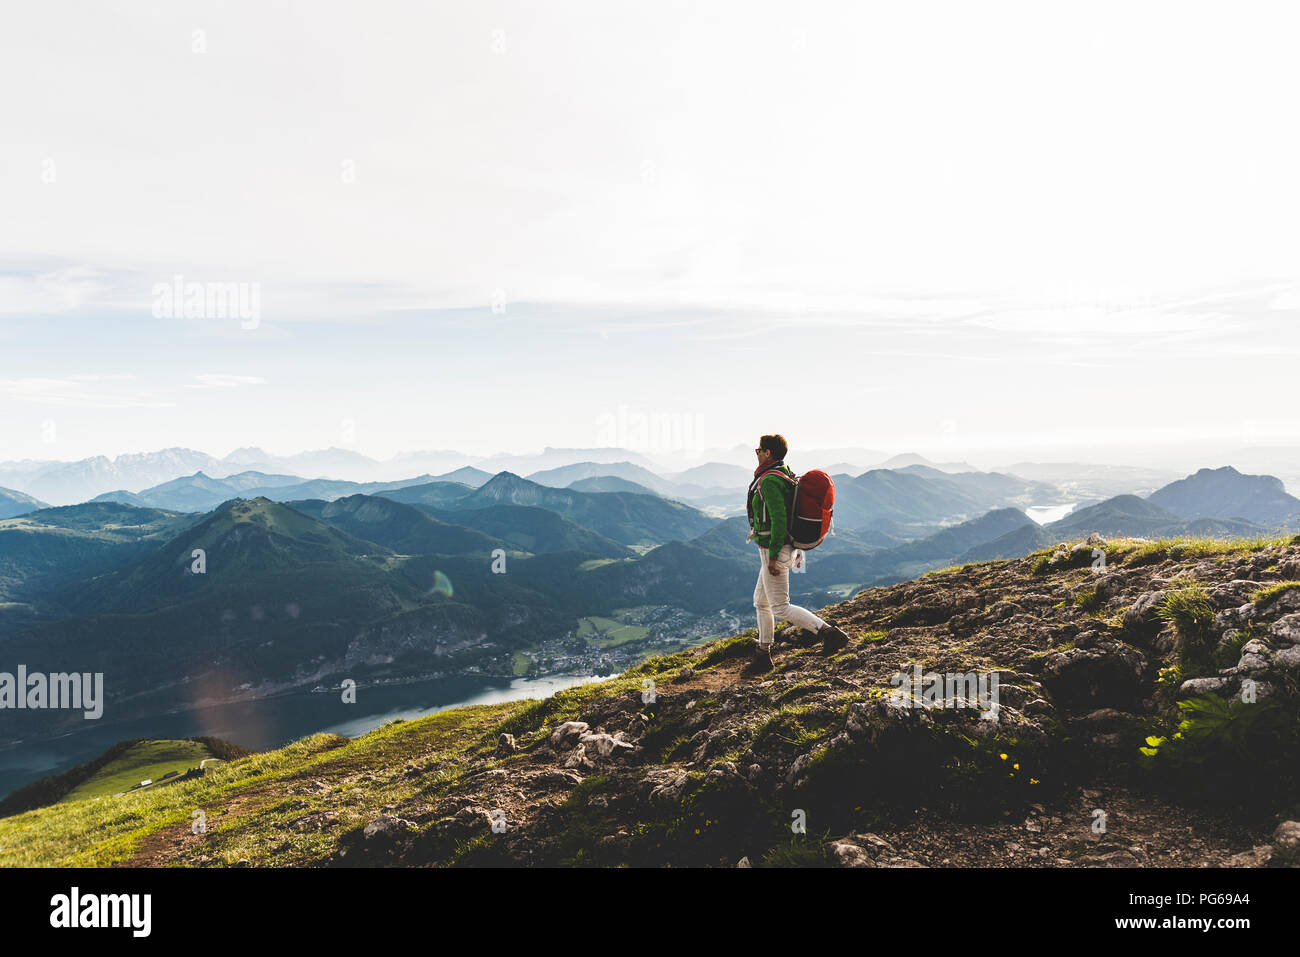 Austria, Salzkammergut, Hiker with backpack hiking in the Alps Stock Photo